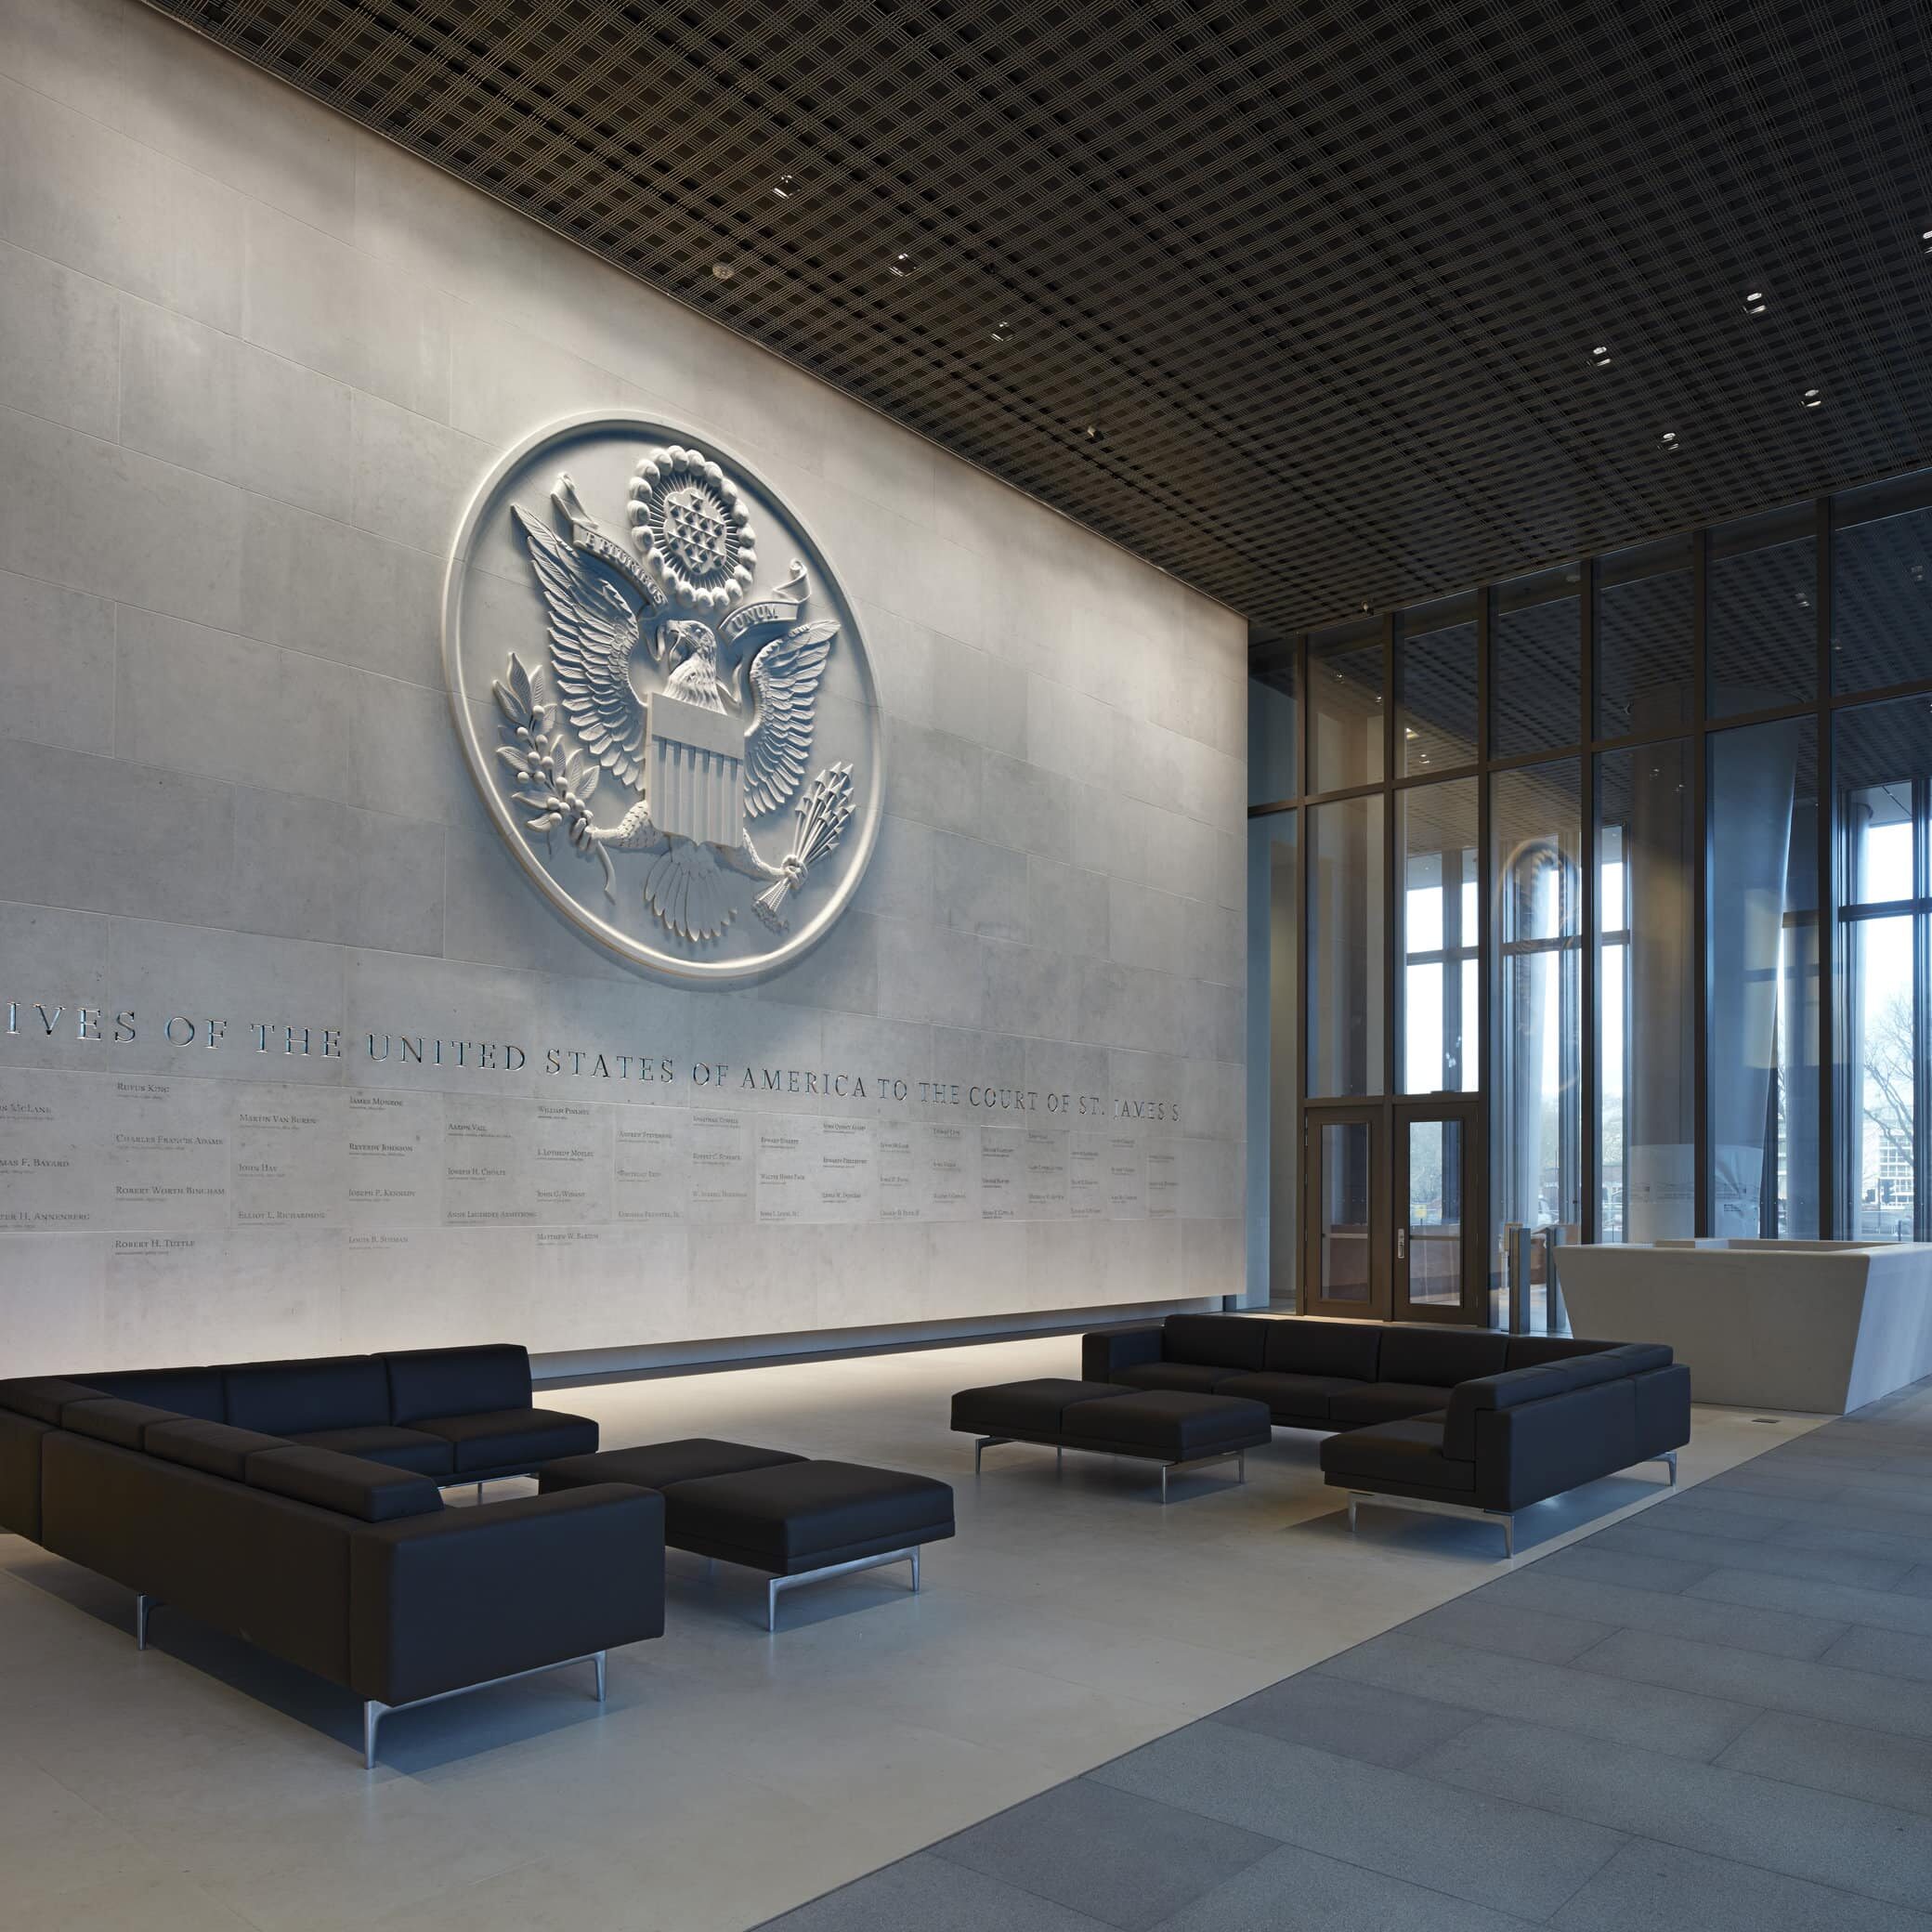 Ambassador Wall with Great Seal in the main lobby, American Embassy, Nine Elms, London, UK.